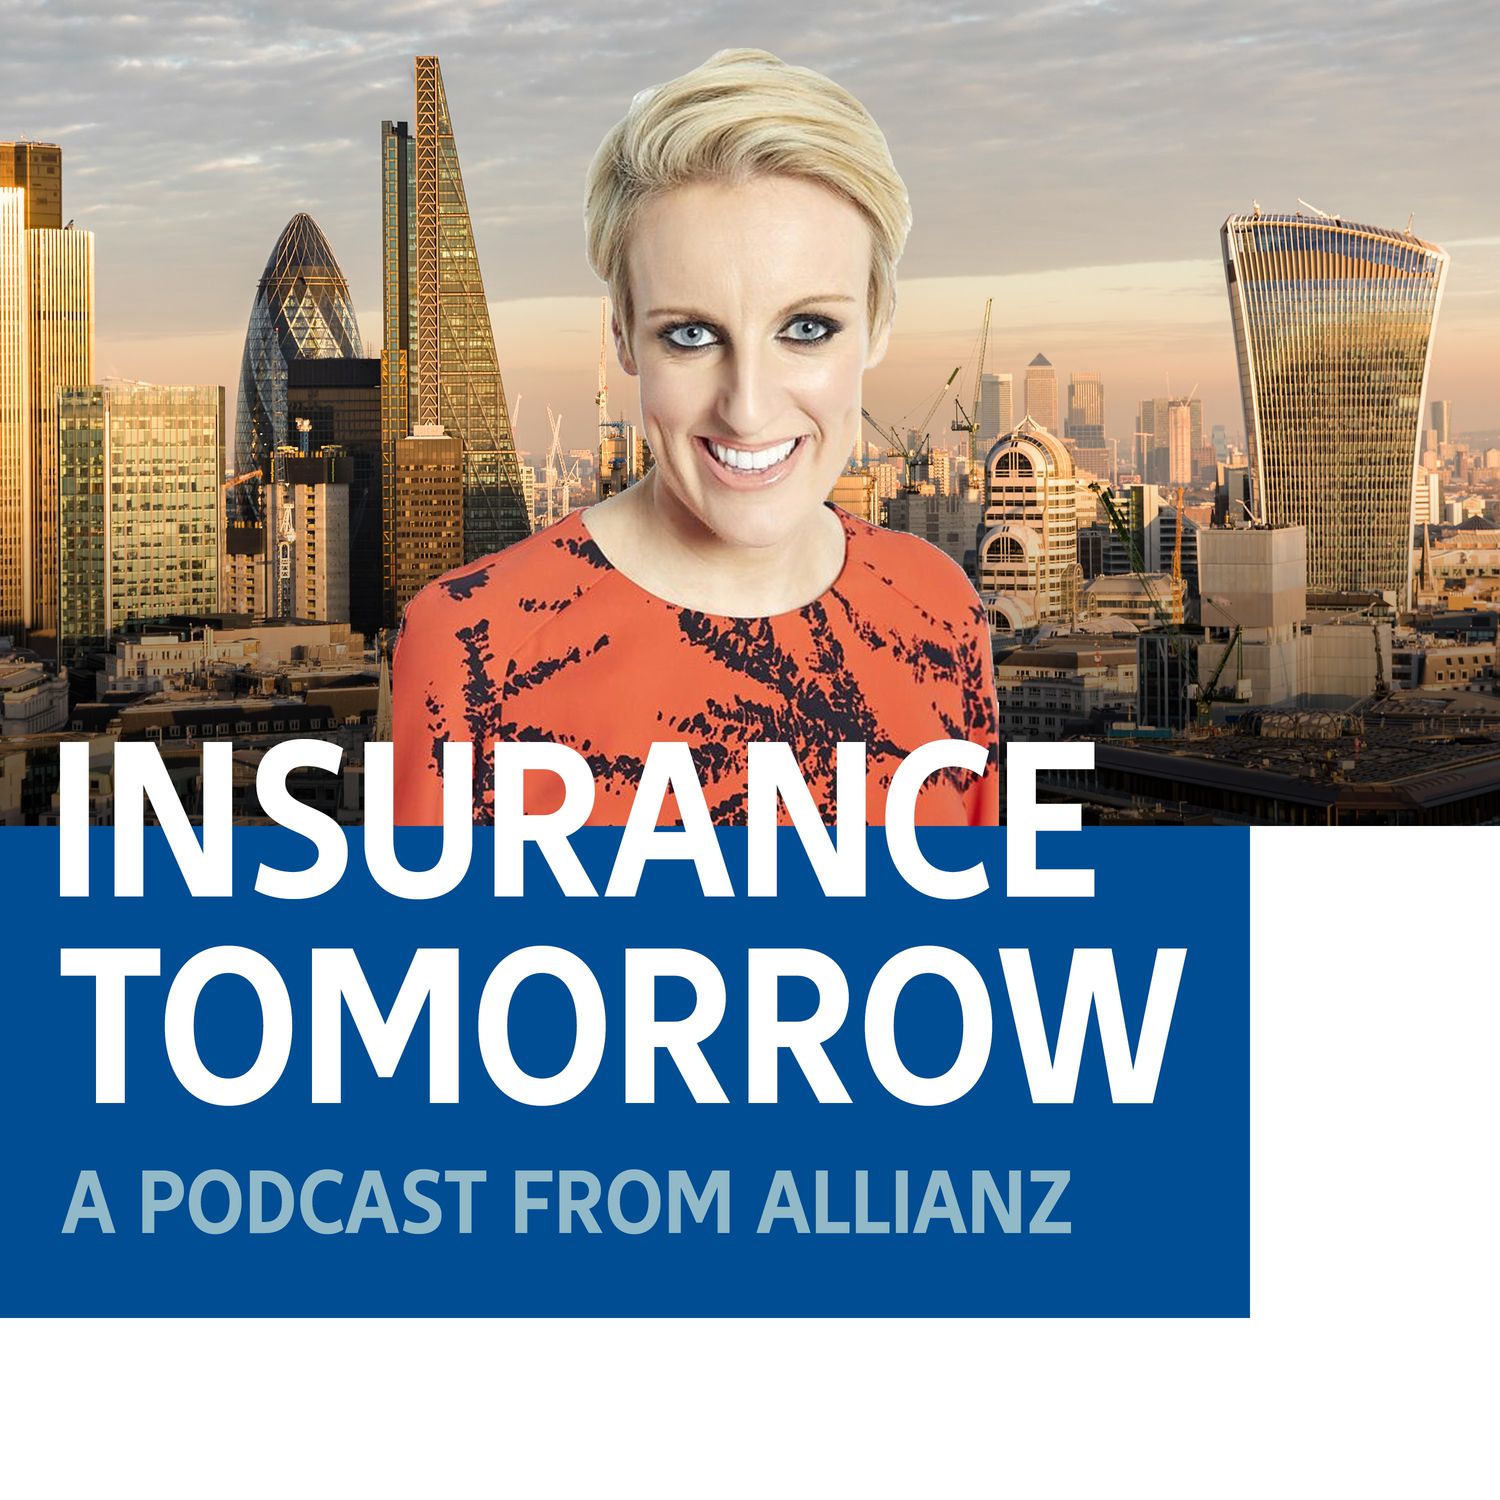 Underinsurance and the Insurance Industry